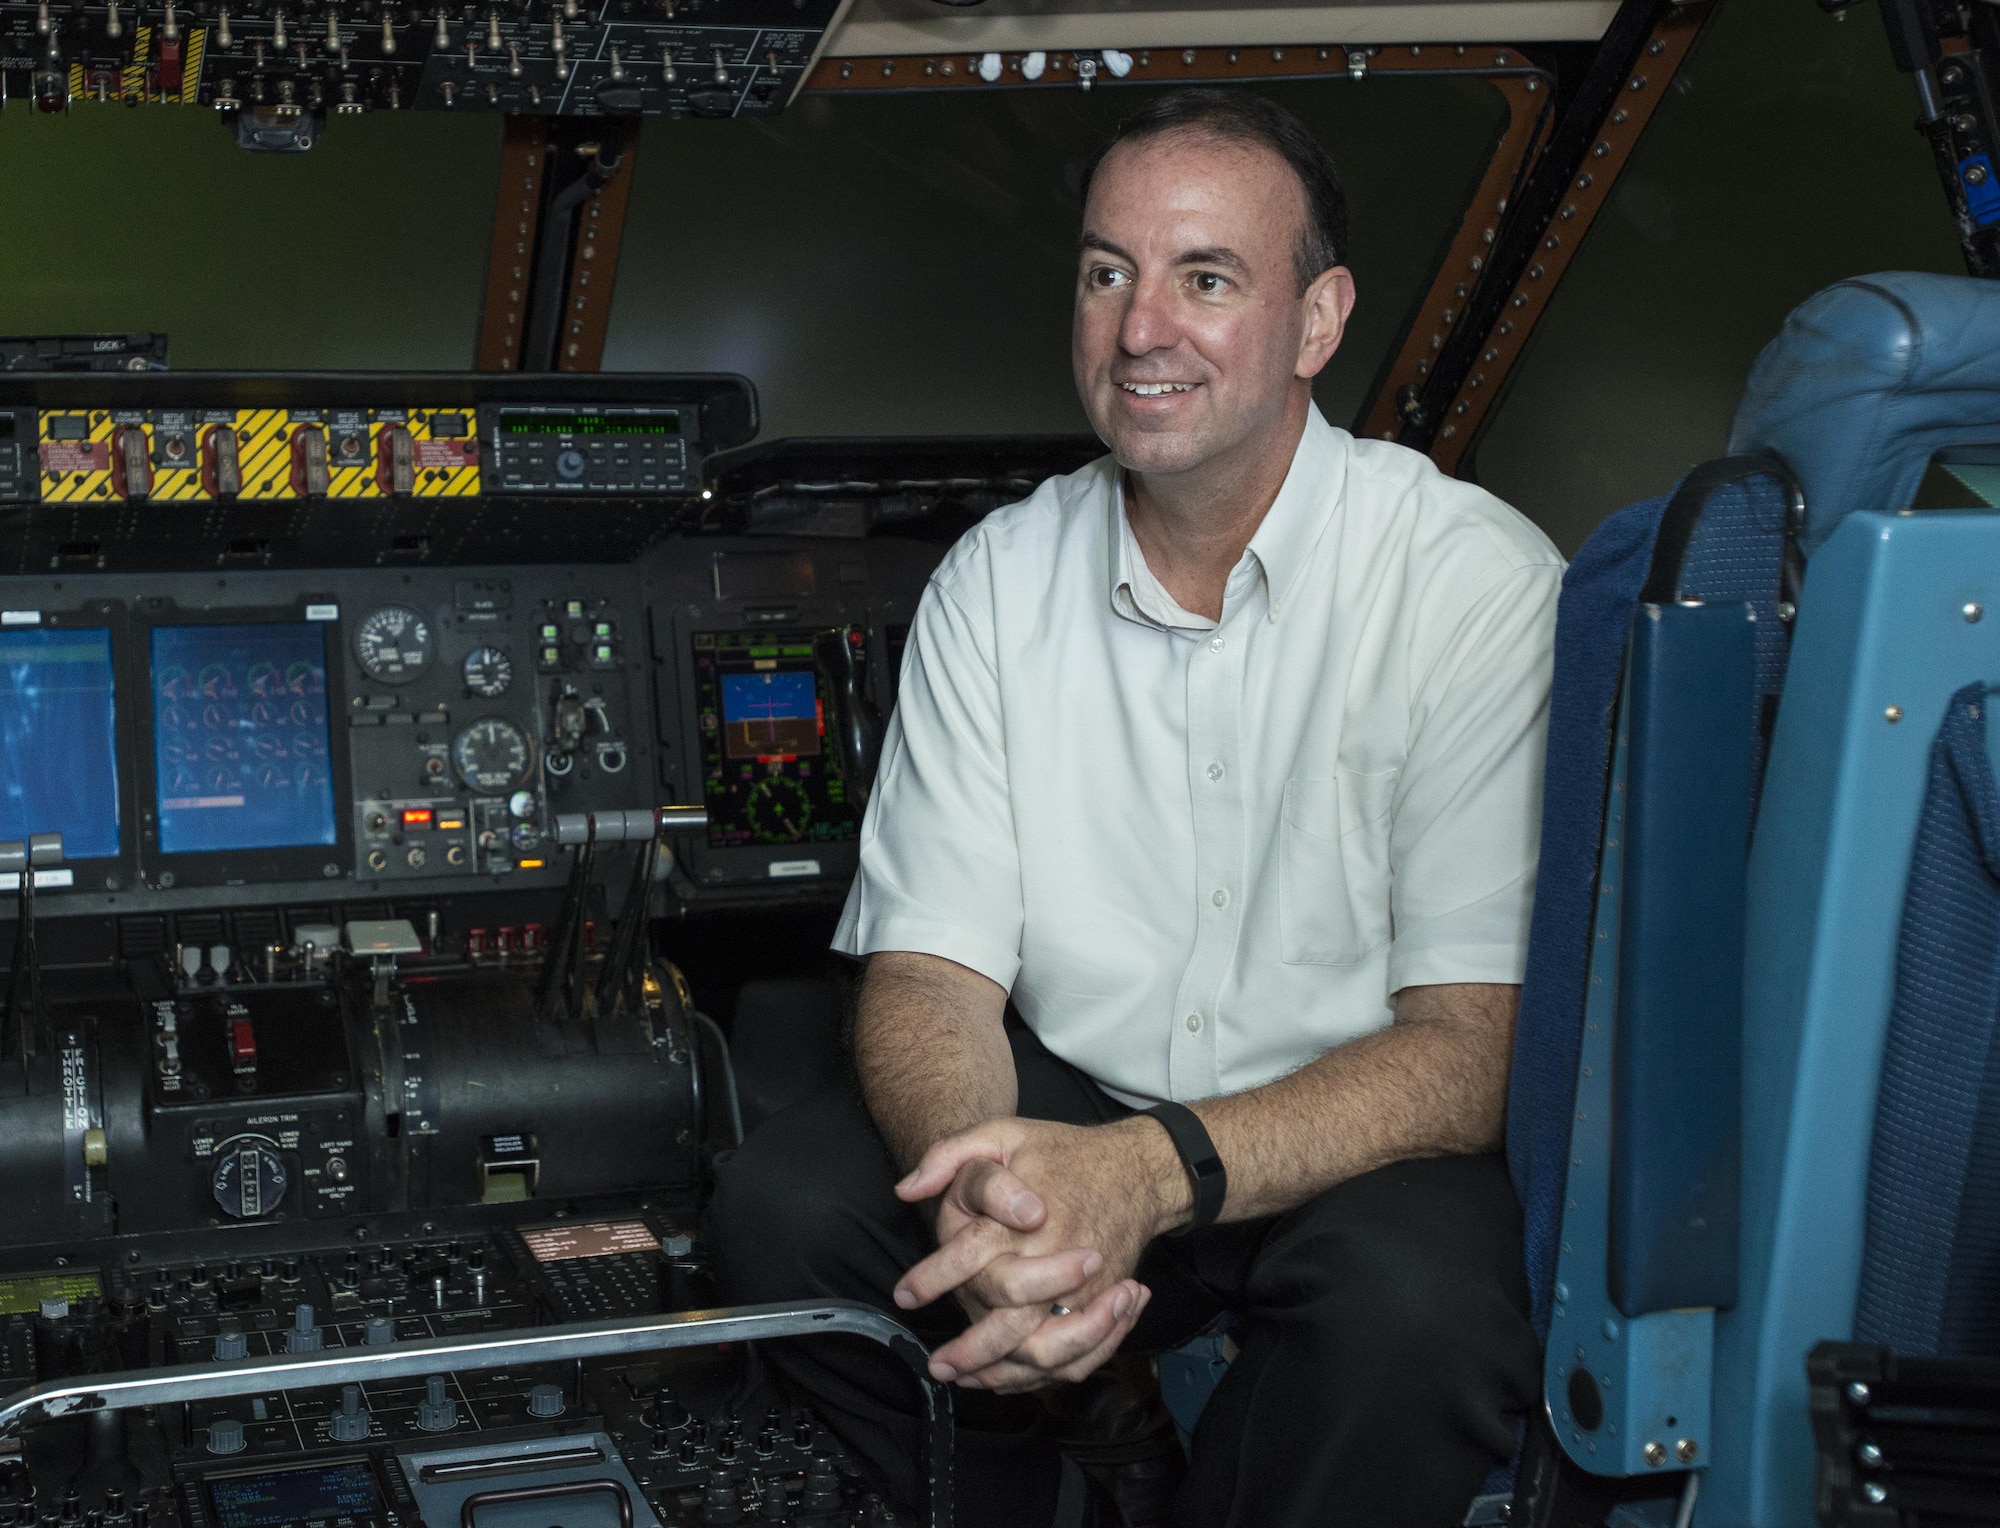 Retired Chief Master Sgt. Bryan Burns, 60th Operations Support Squadron, poses for a photo inside a C-5M Super Galaxy at Travis Air Force Base, Calif., June 6, 2016. Burns flew from McChord Air Force Base, Wash., to Travis AFB on July 9, 1986 in just two hours to be present for the birth of his son Matthew. Burns served 25 years in the U.S. Air Force and retired in 2007. (U.S. Air Force Photo by Heide Couch/Released)